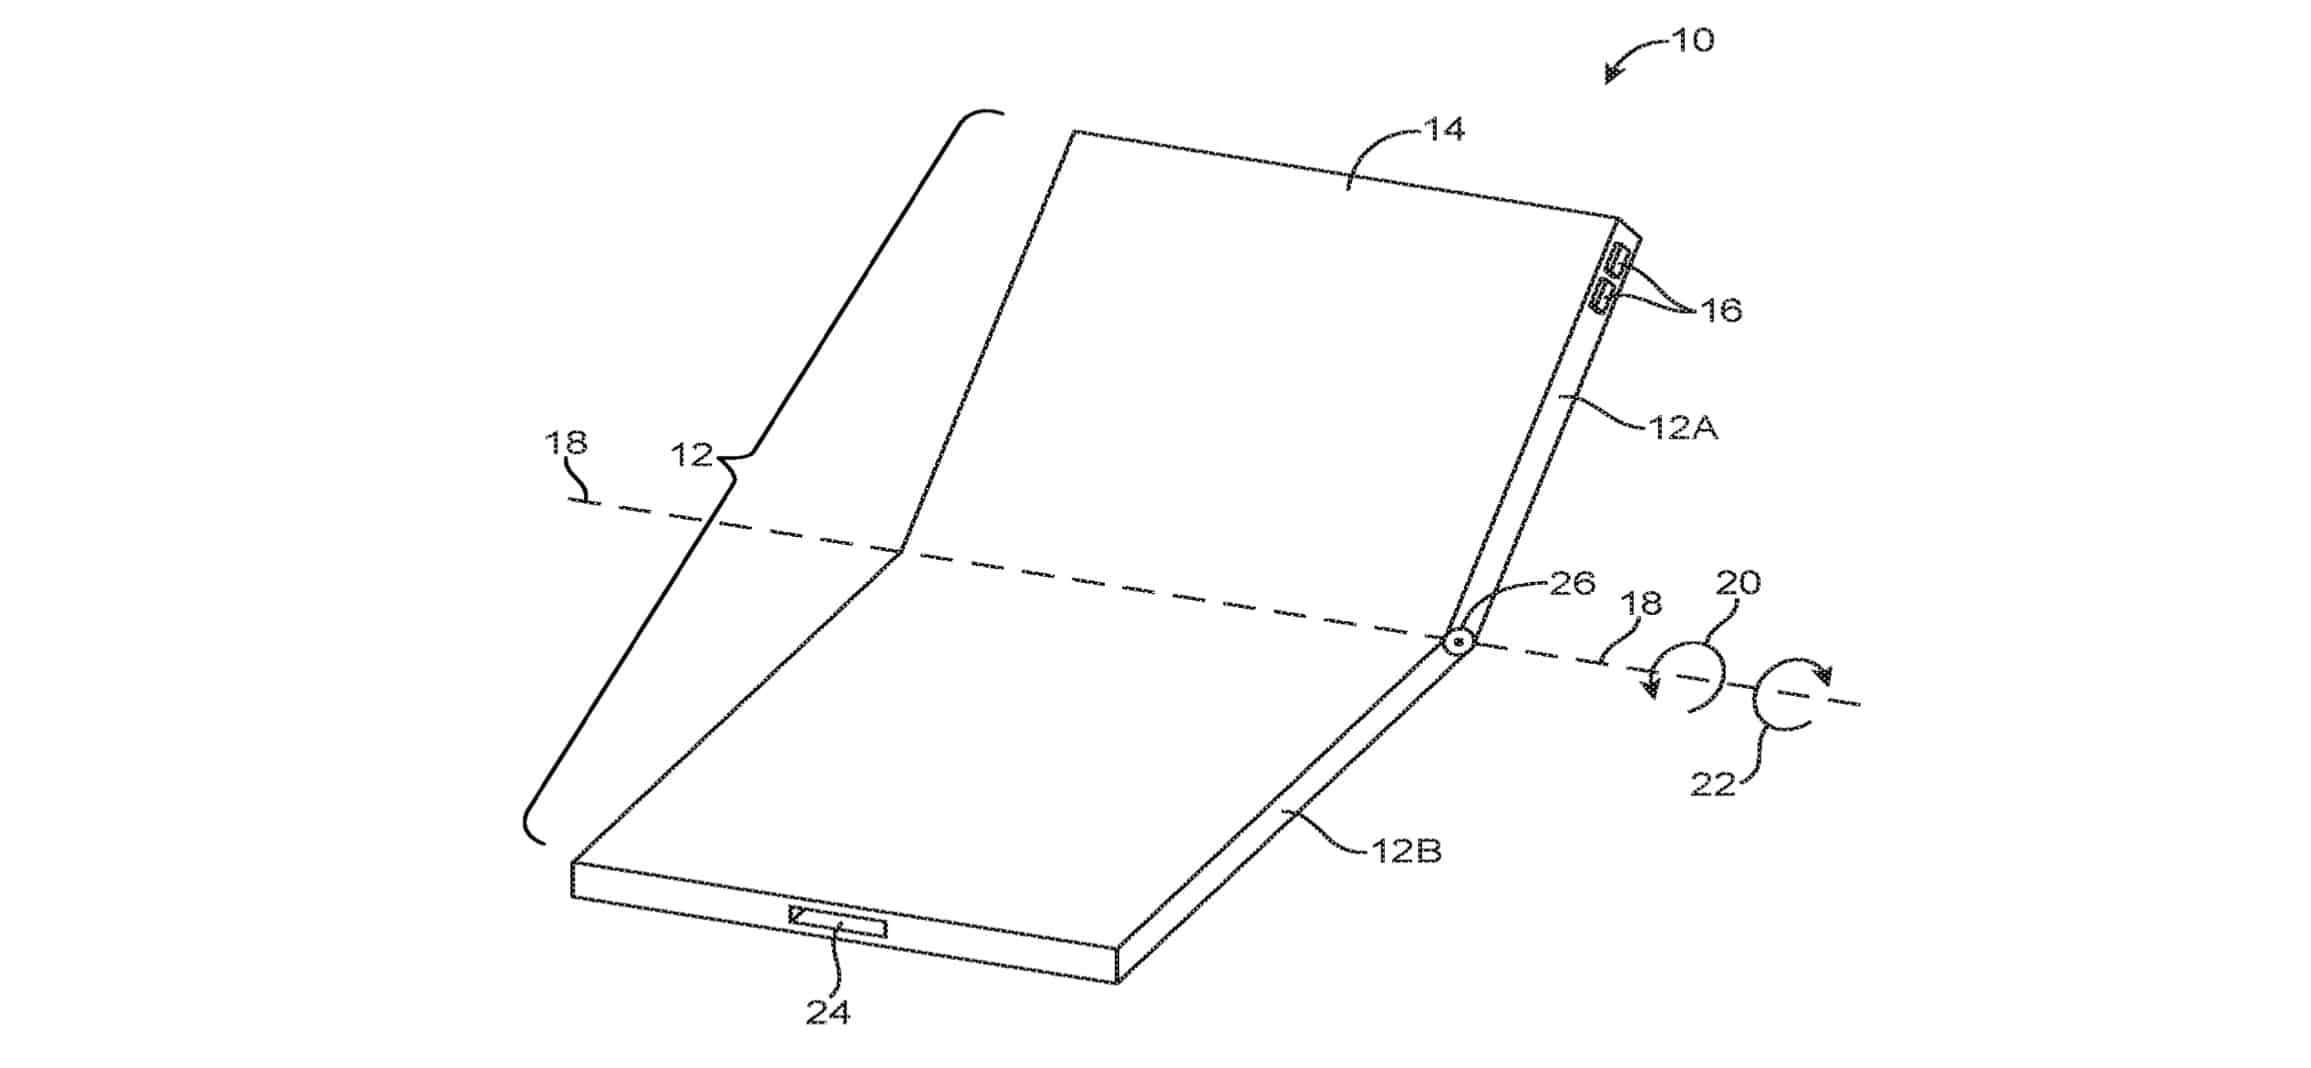 This is an early concept drawing from Apple for a folding iPhone.